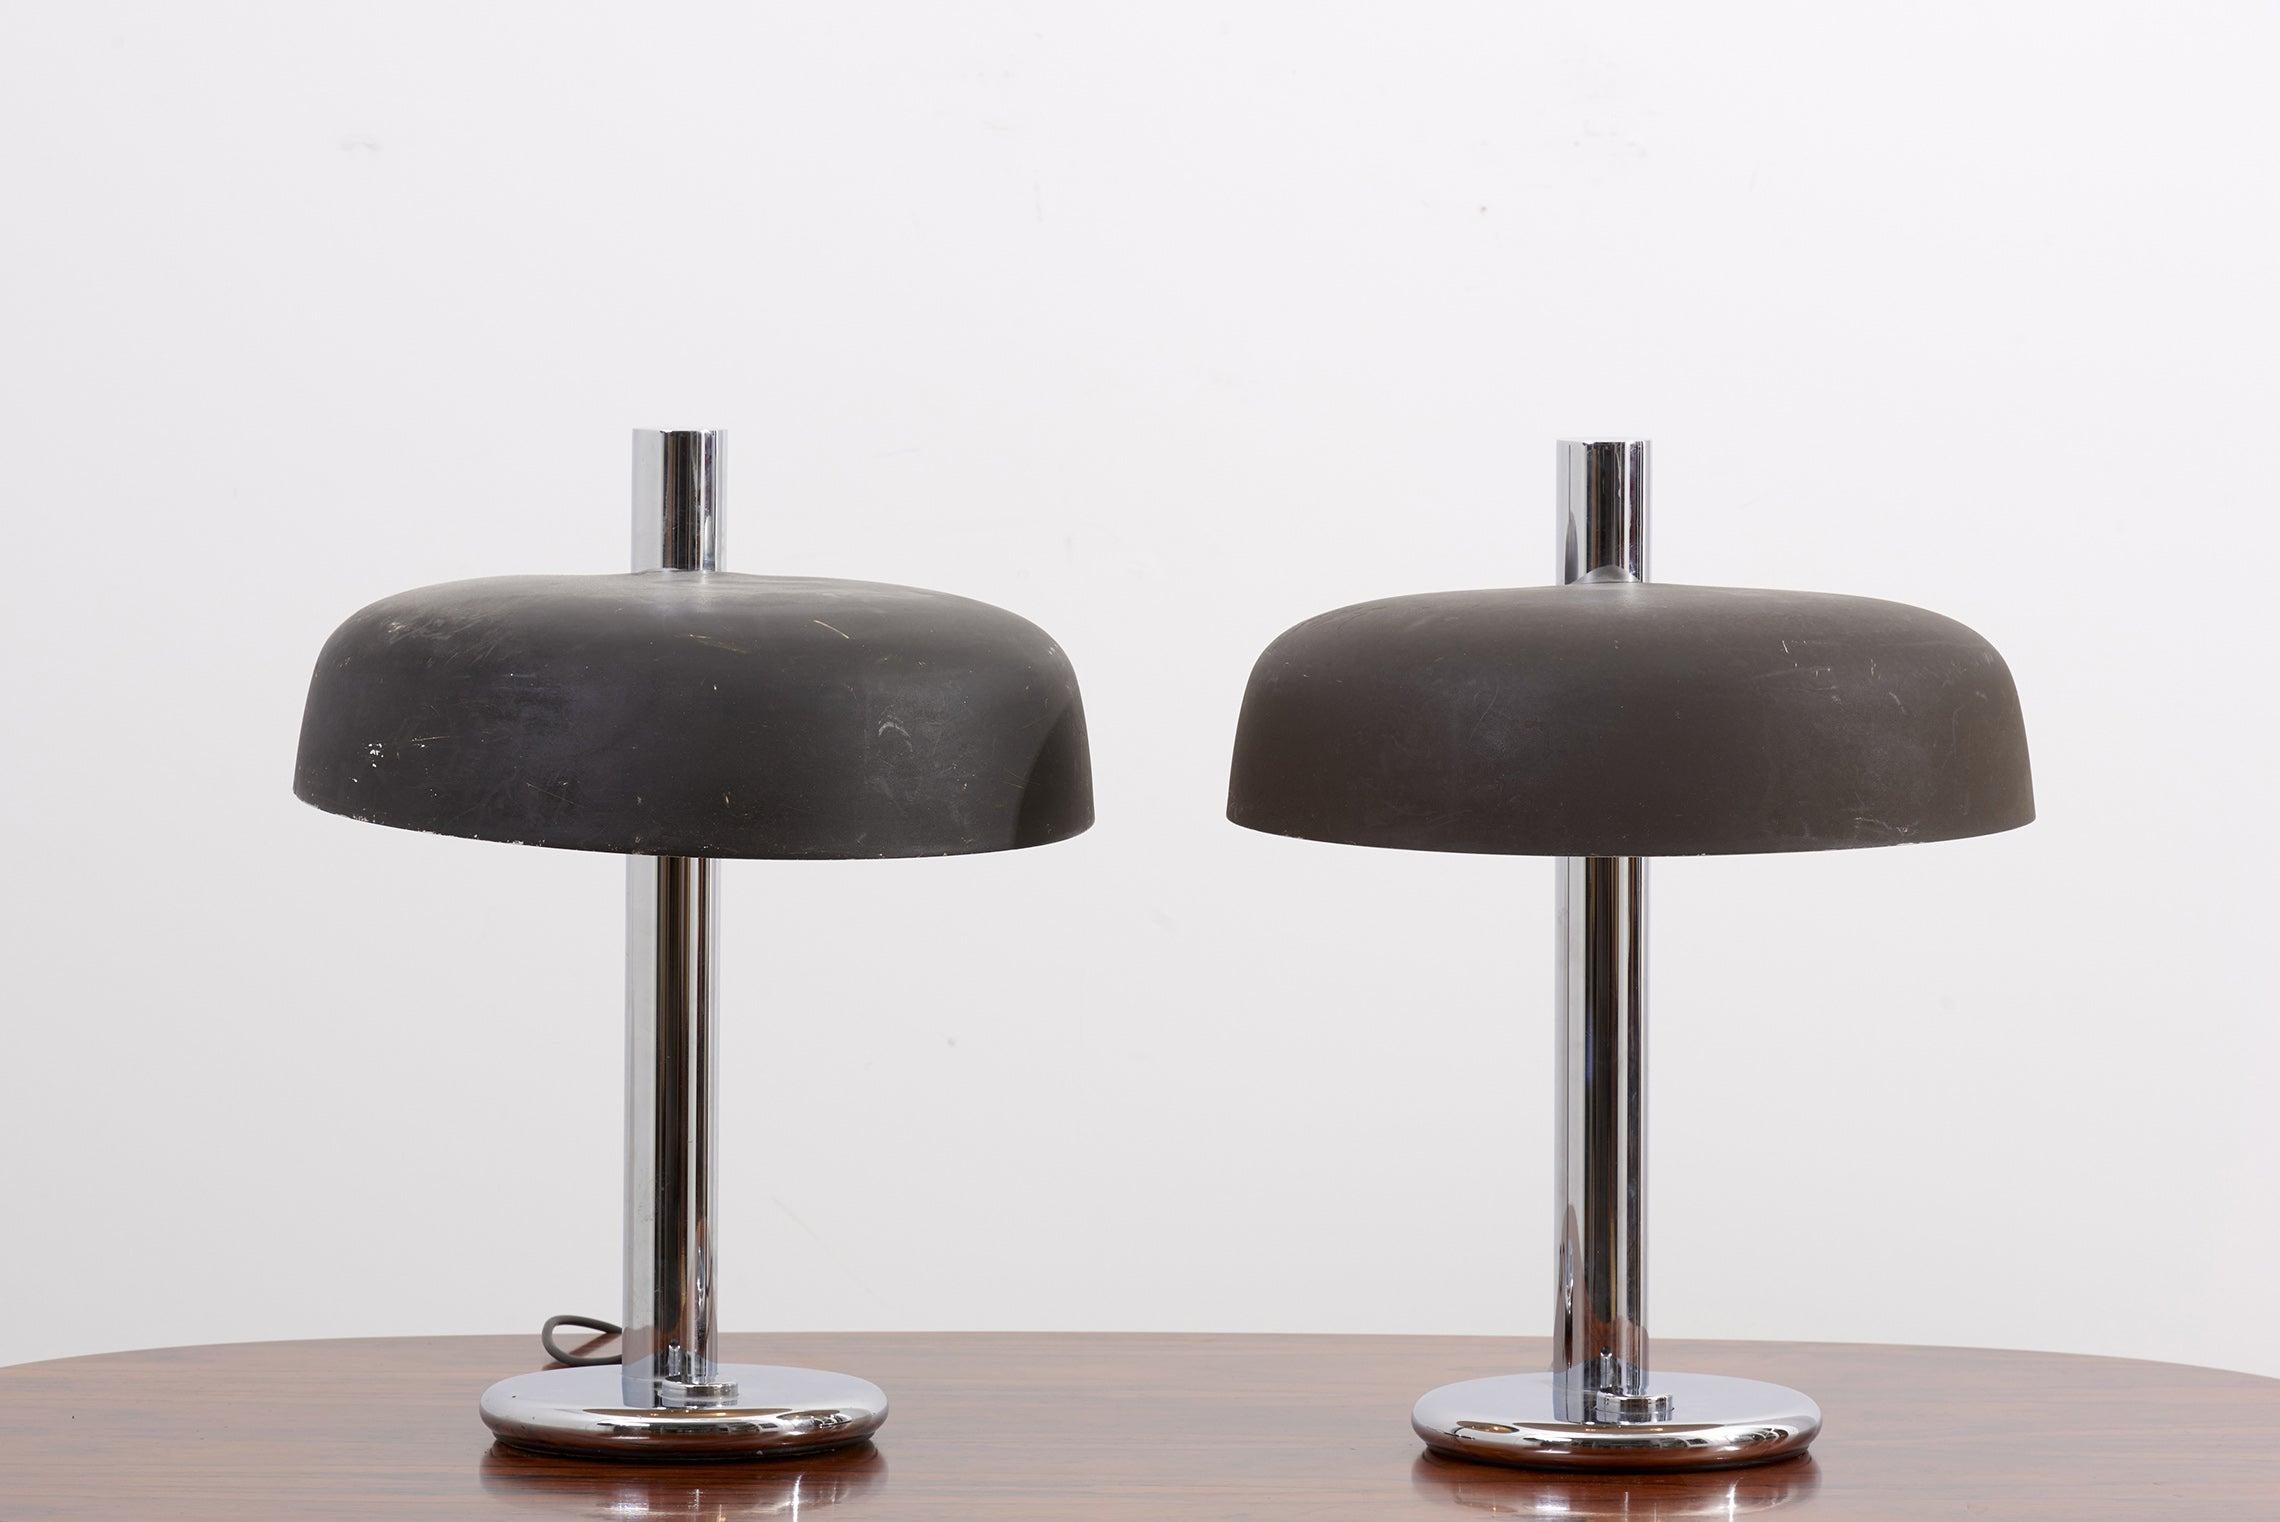 Pair of 1960s table lamps with steel base. Please note: Lamp should be fitted professionally in accordance to local requirements.